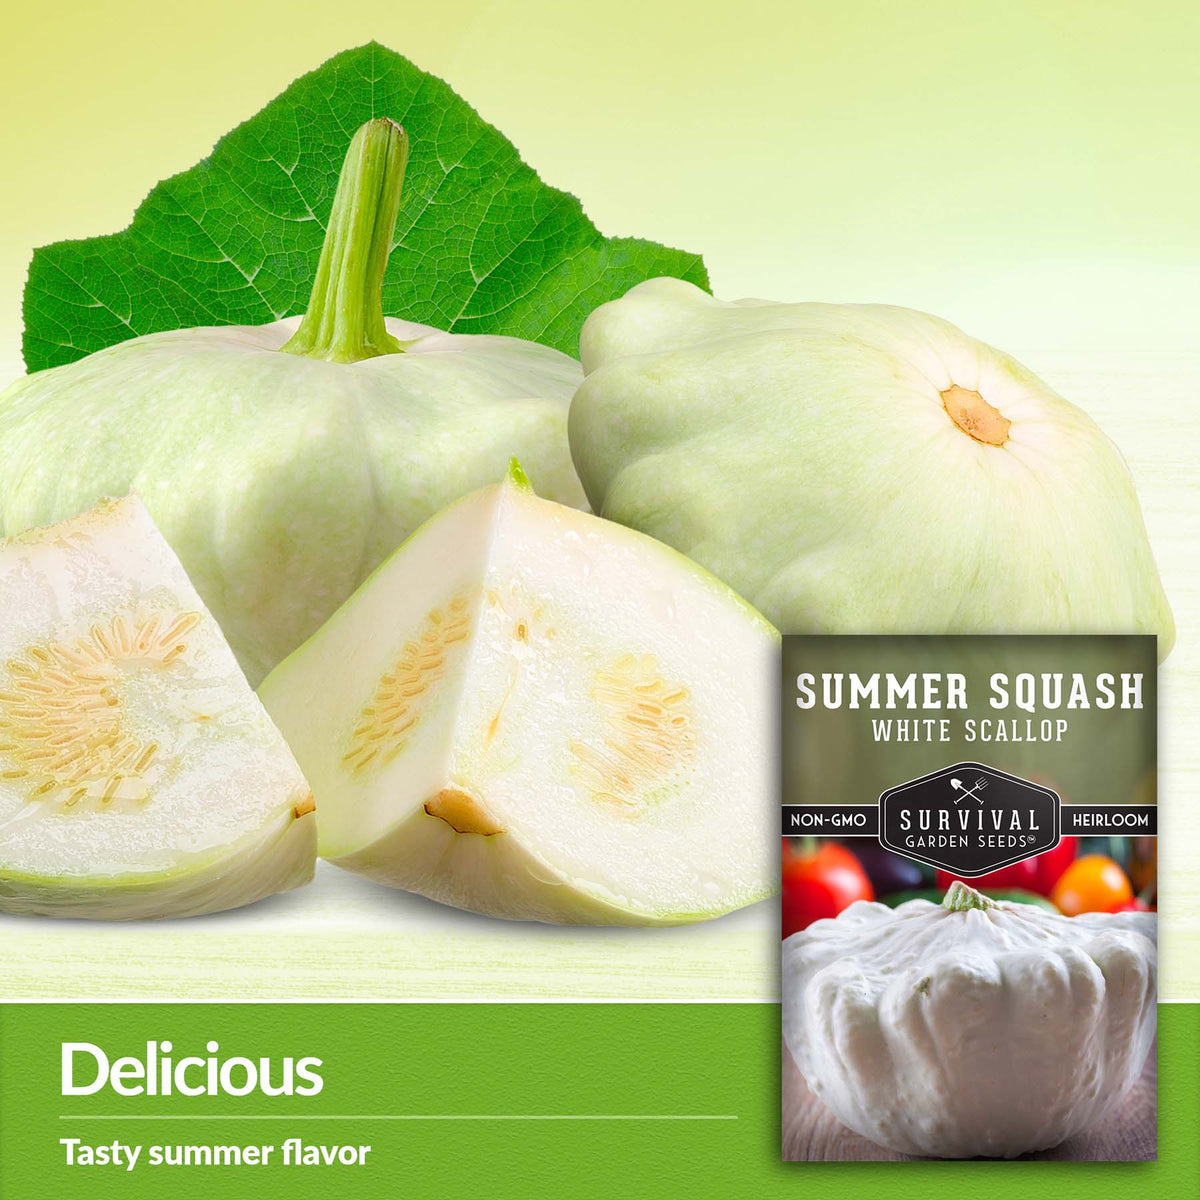 White Scallop is a tasty summer squash